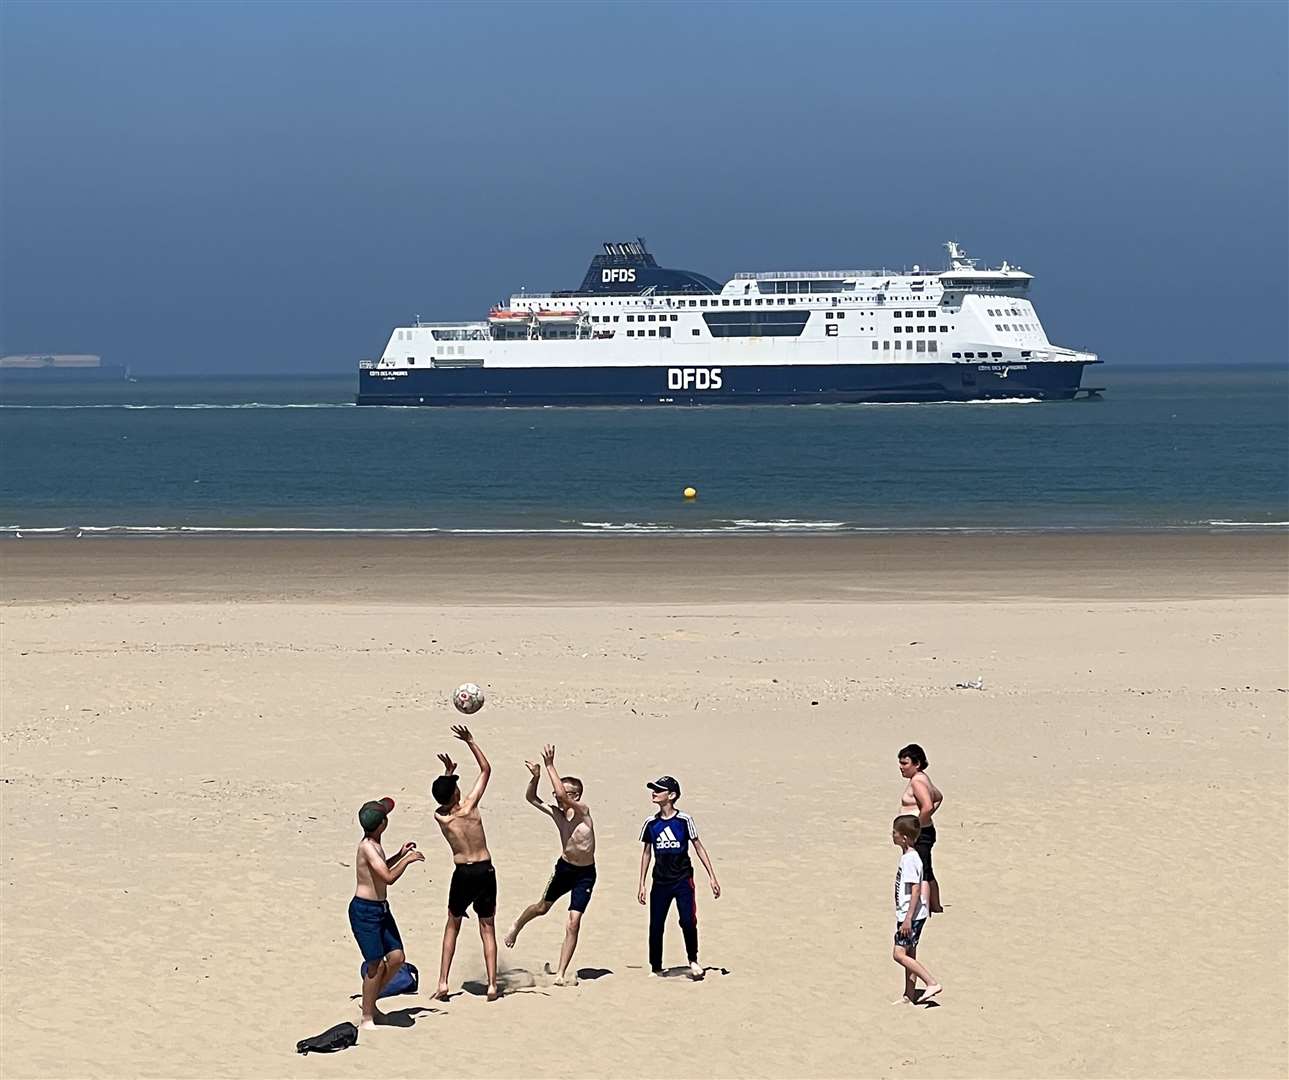 Calais' golden beaches are just 90 minutes from Dover with DFDS. All images by Barry Goodwin.